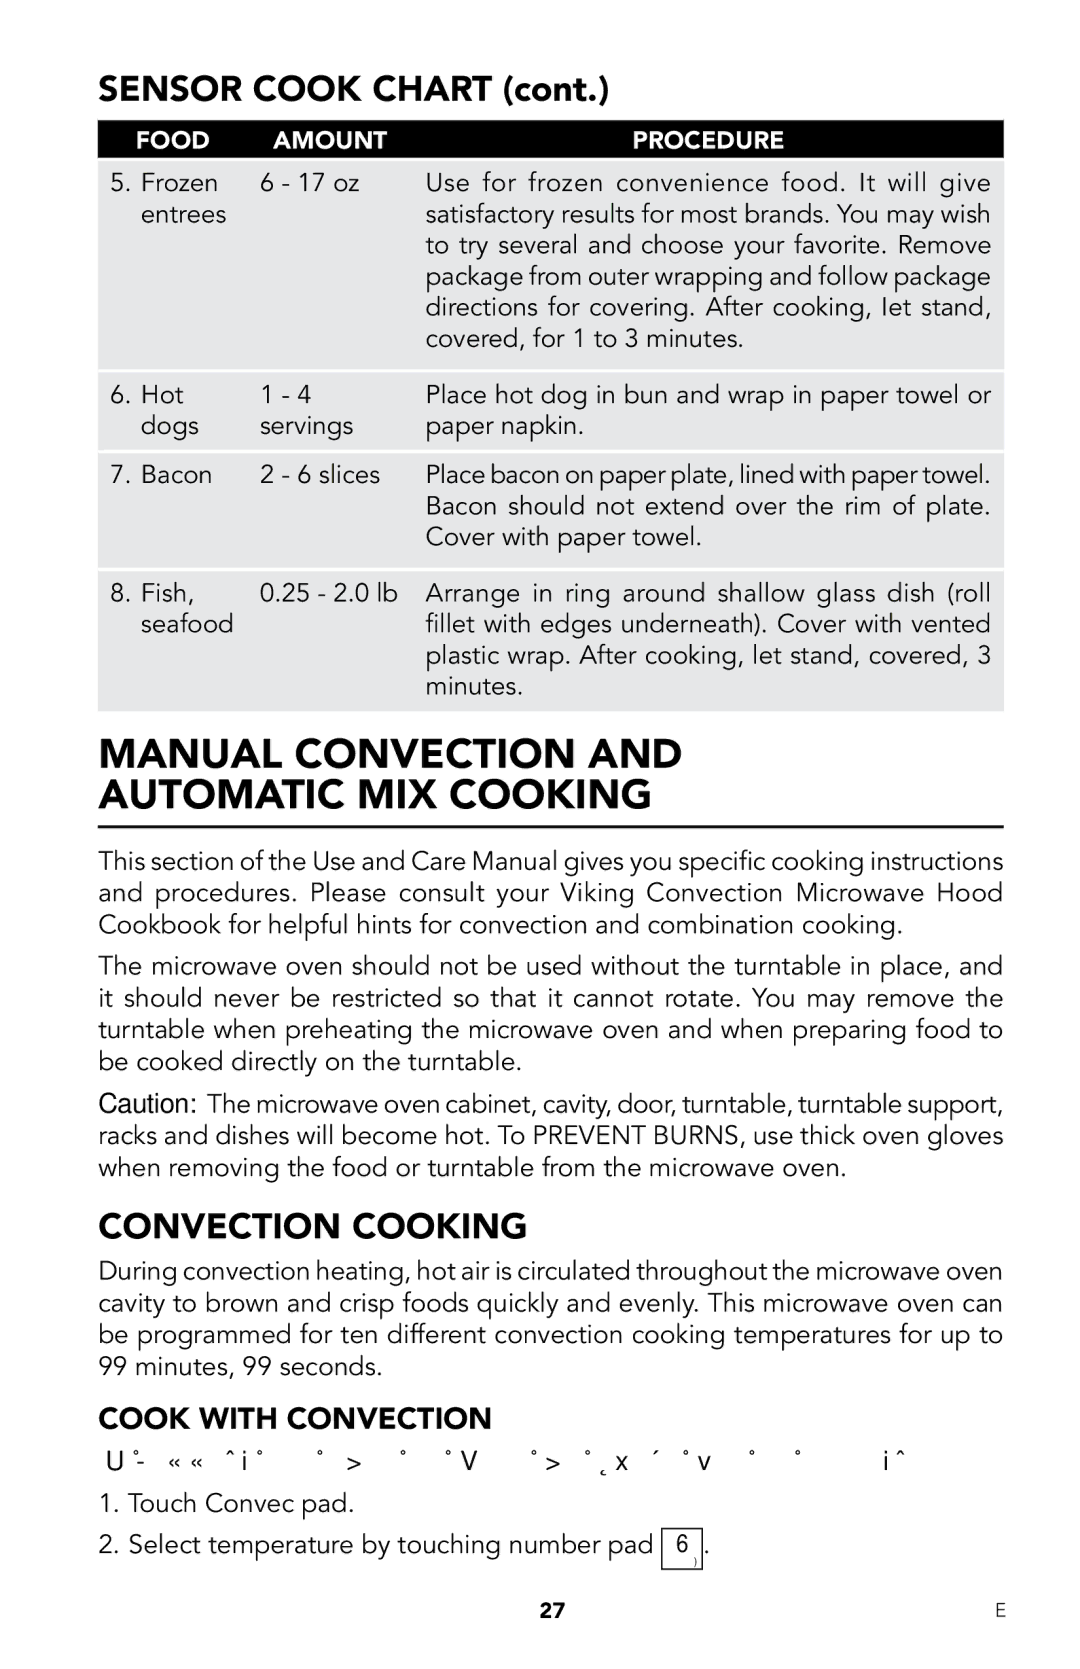 Viking RDMOR206SS manual Manual convection and automatic mix cooking, Convection Cooking 